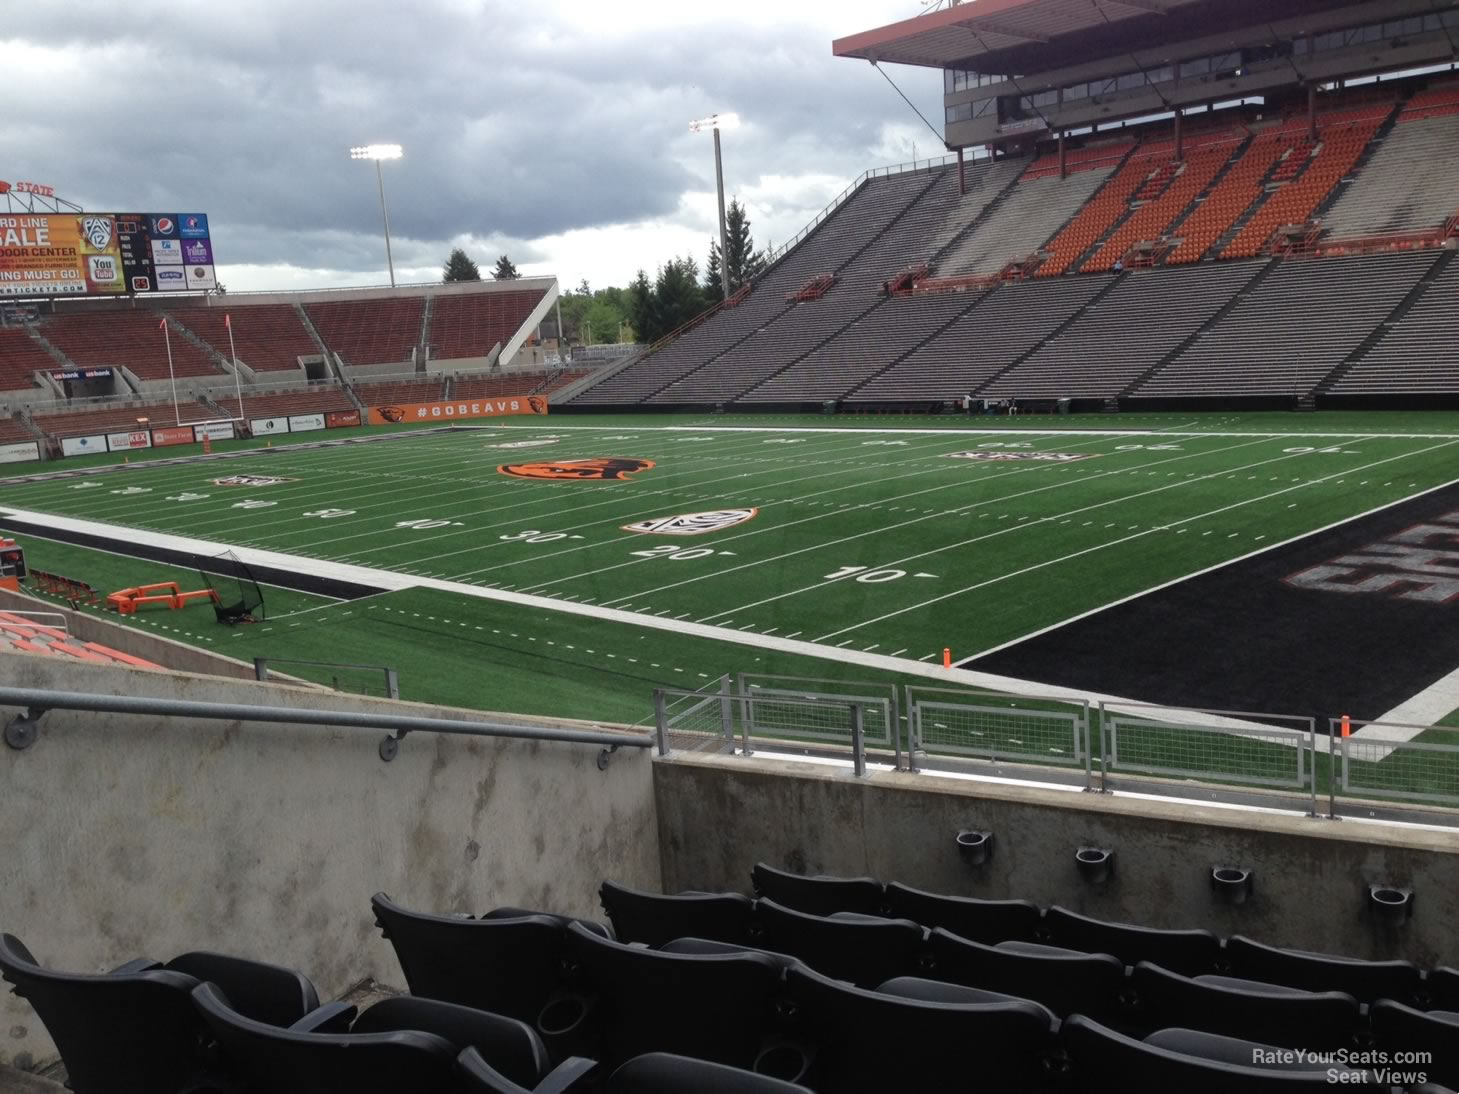 section 111, row 20 seat view  - reser stadium